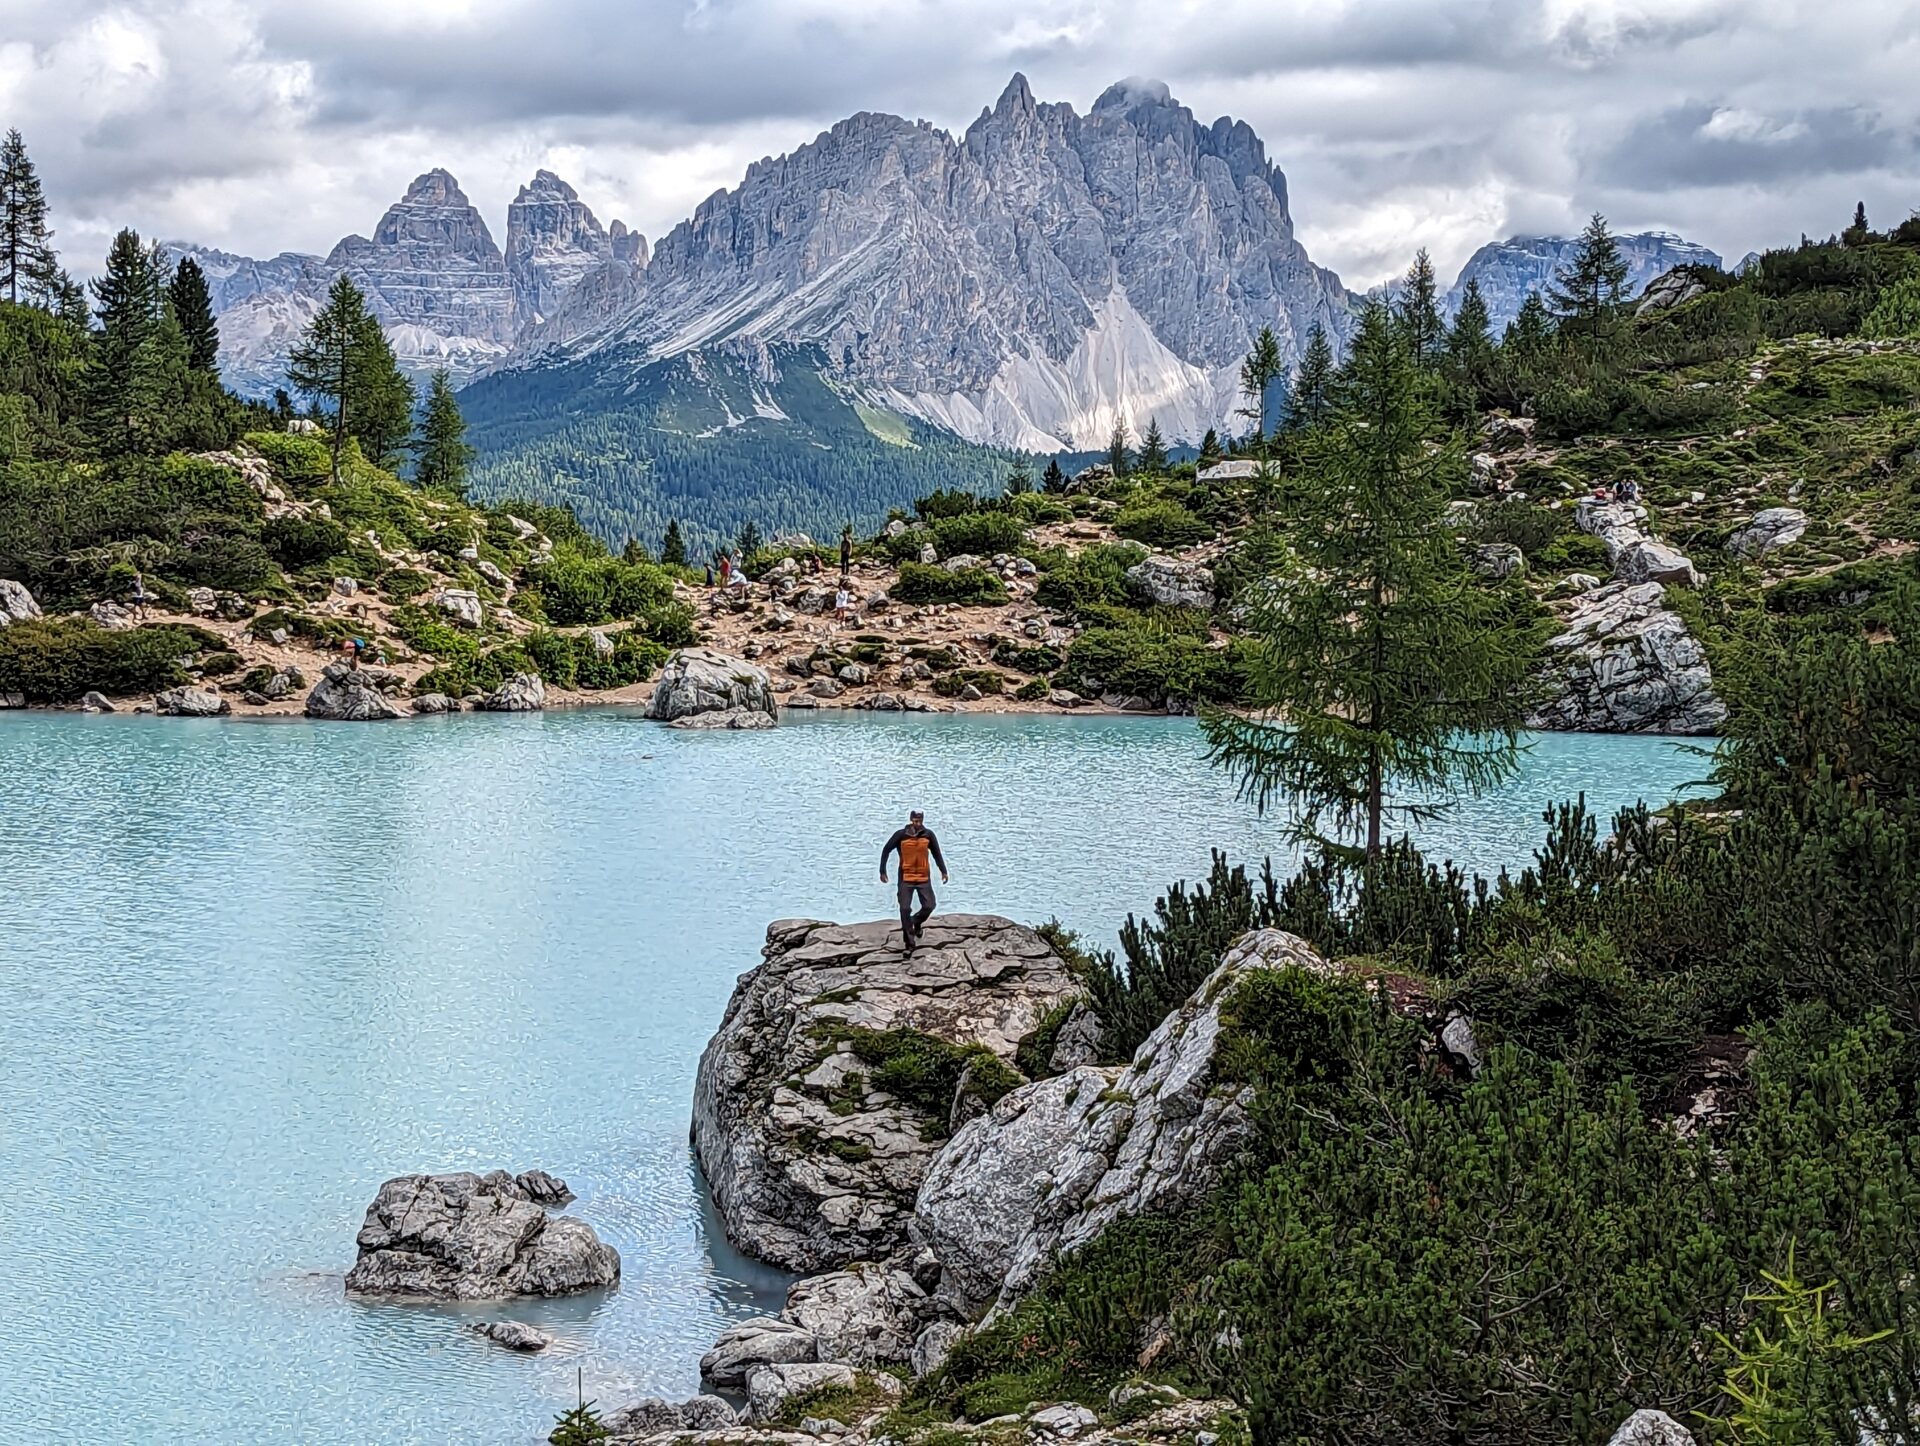 A hiker descending a large rock at the edge of Lago di Sorapis with mountains in the background